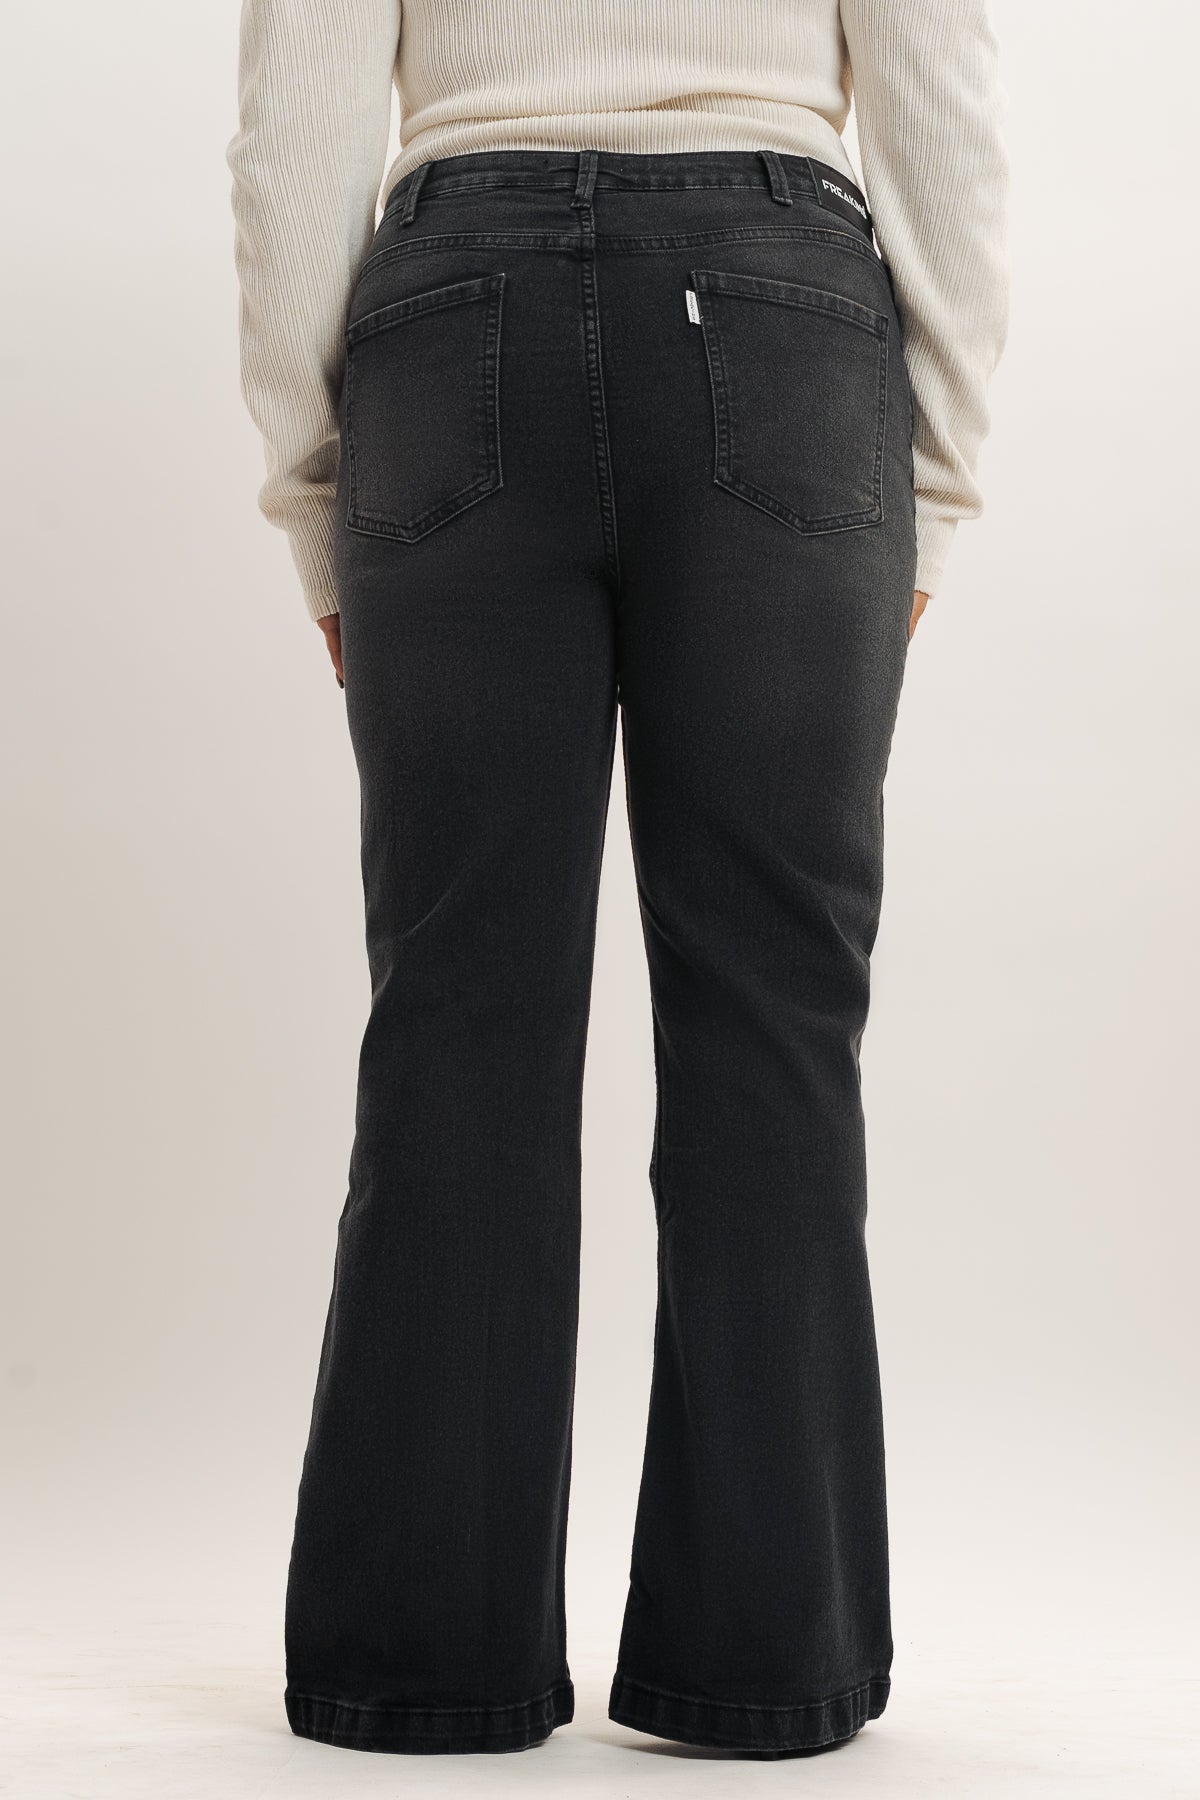 Knit Denim Pull-On Bootcut Jeans - Coldwater Creek